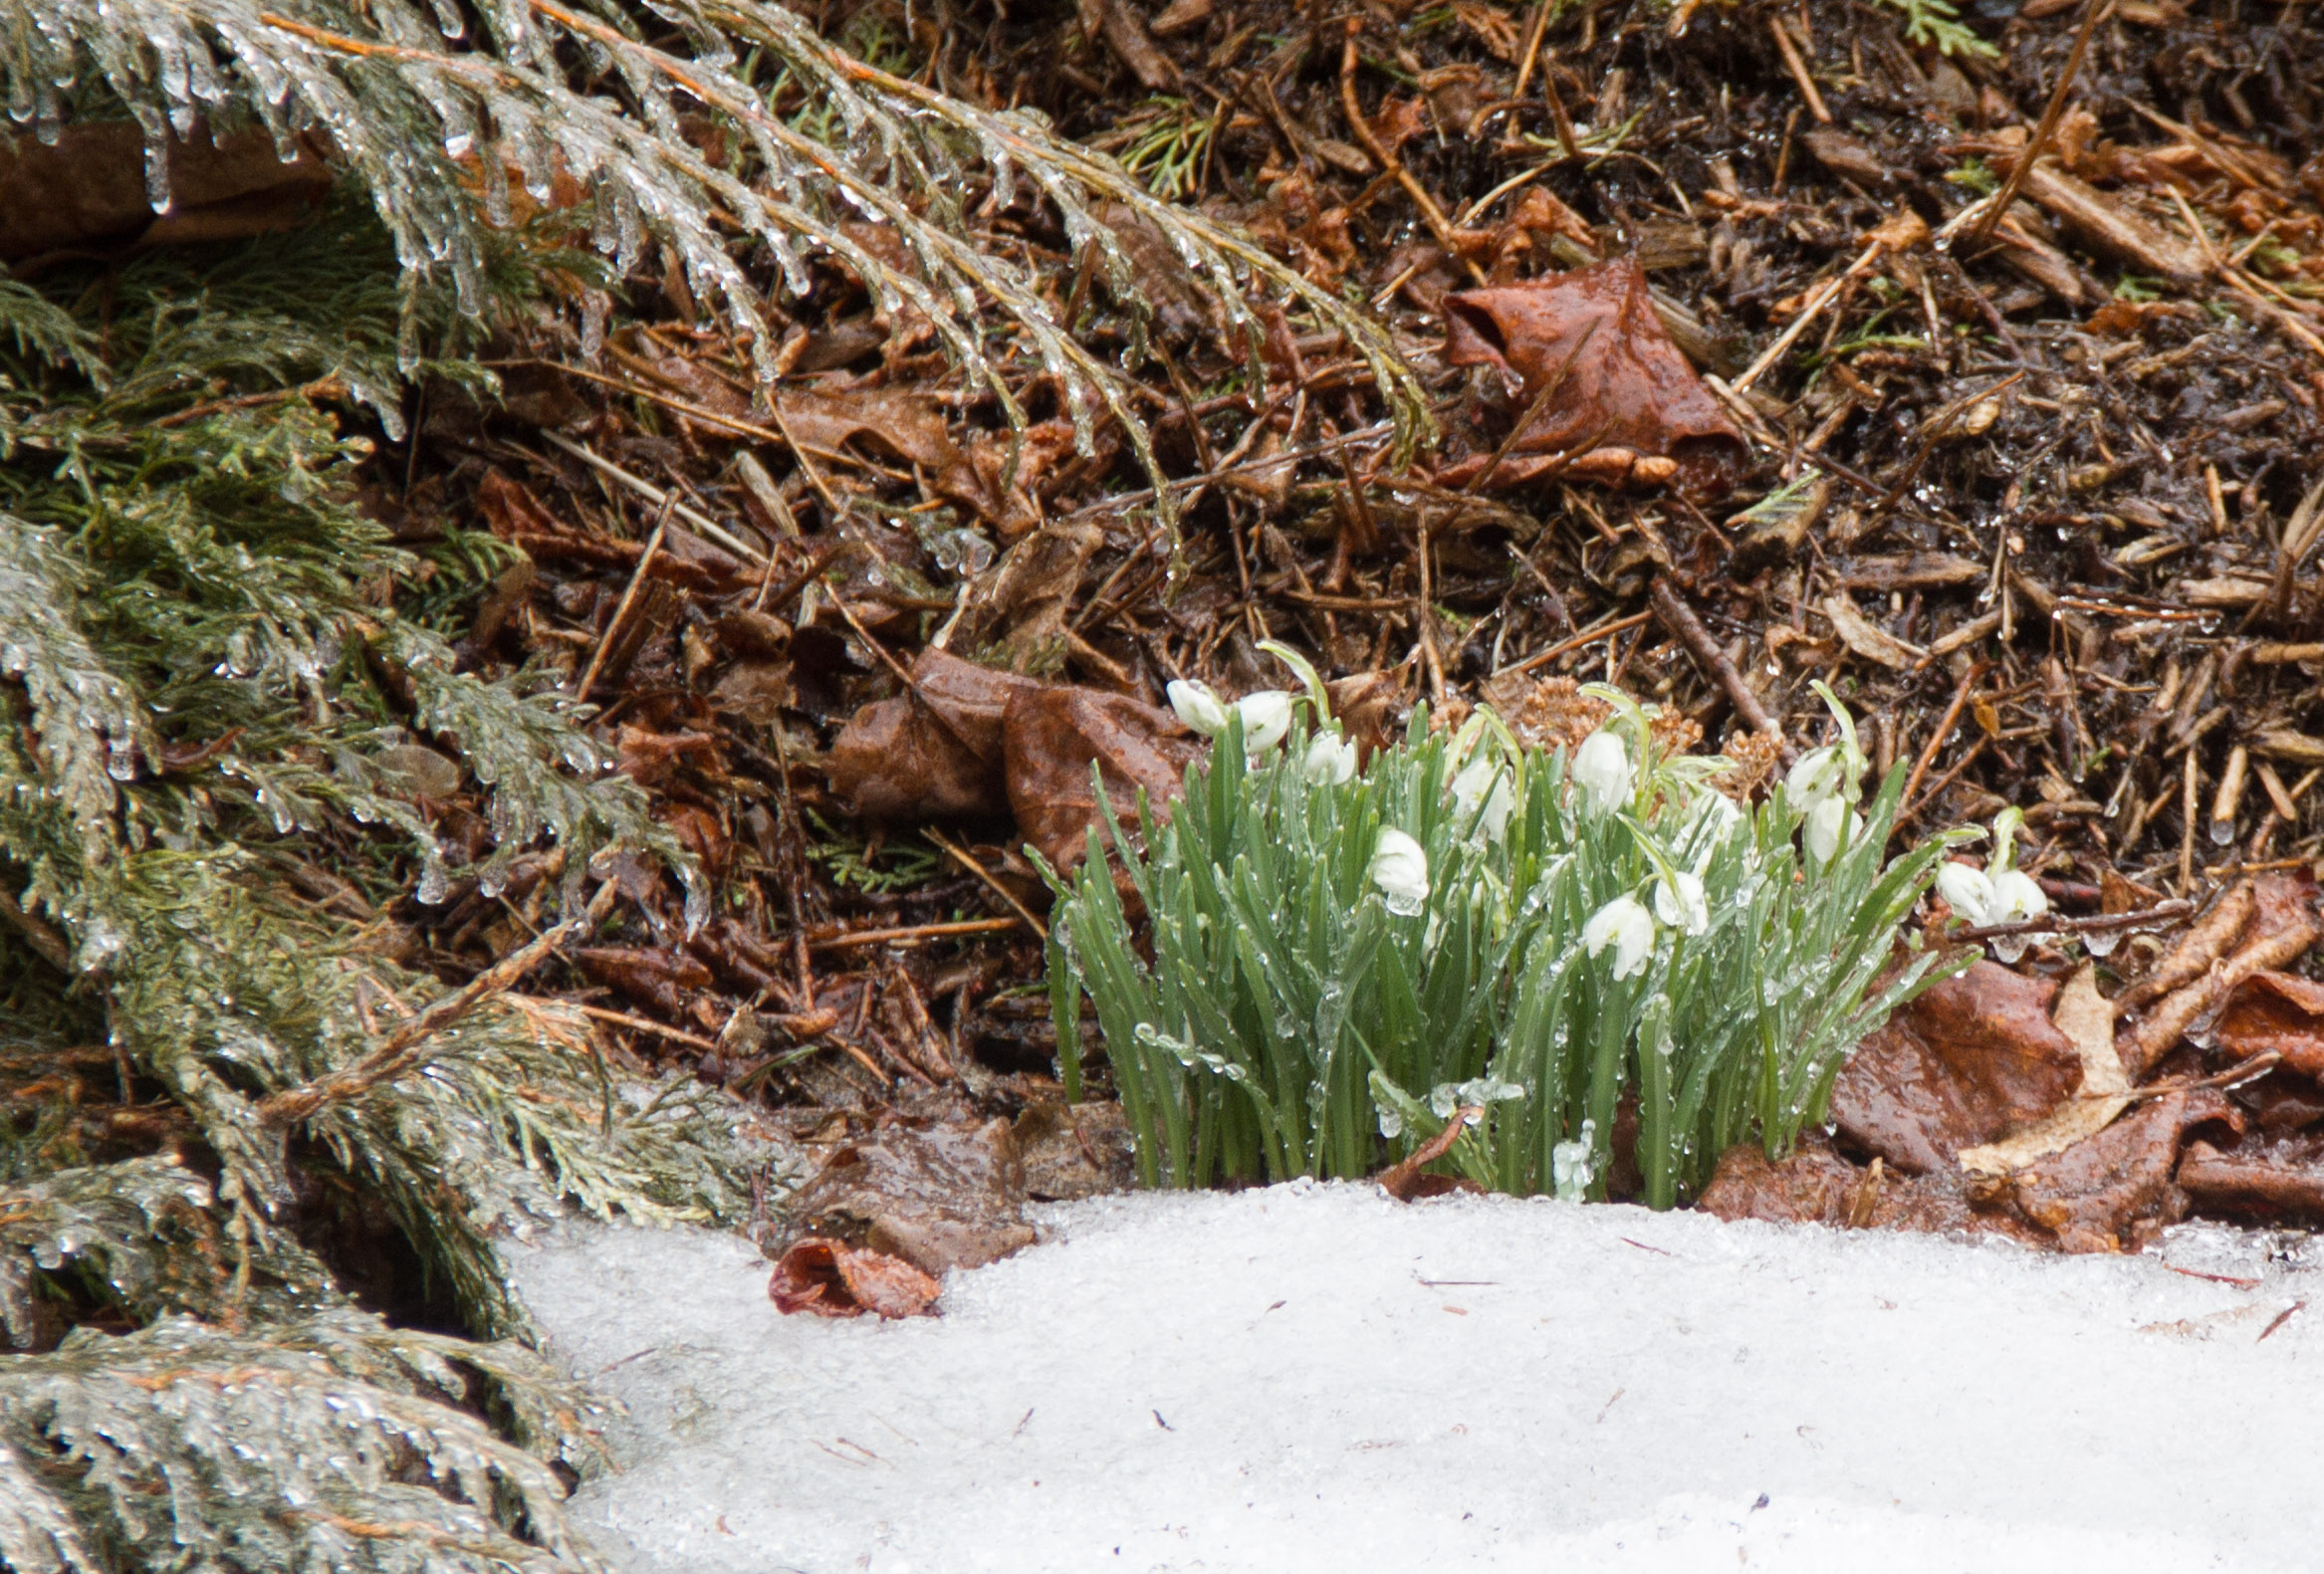 Poor little snowdrops, coated with ice from this morning's freezing rain.